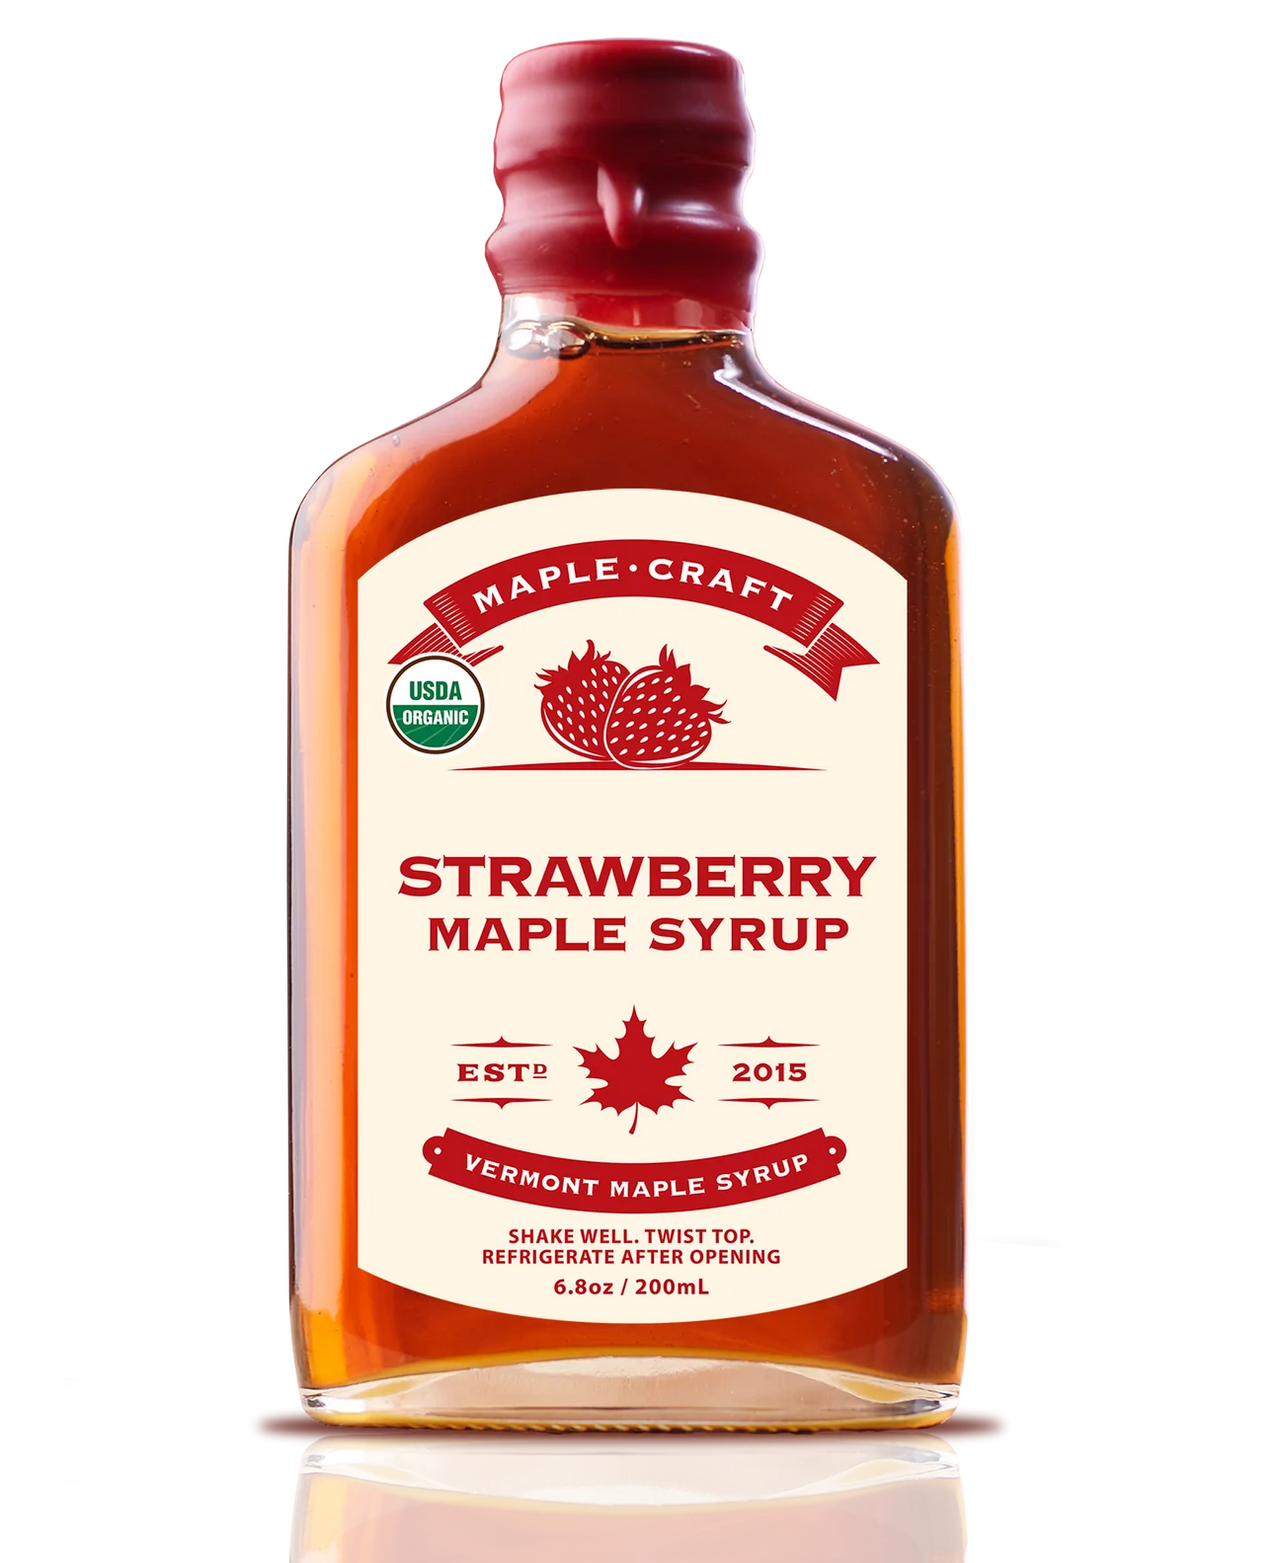 Maple Craft Strawberry Maple Syrup